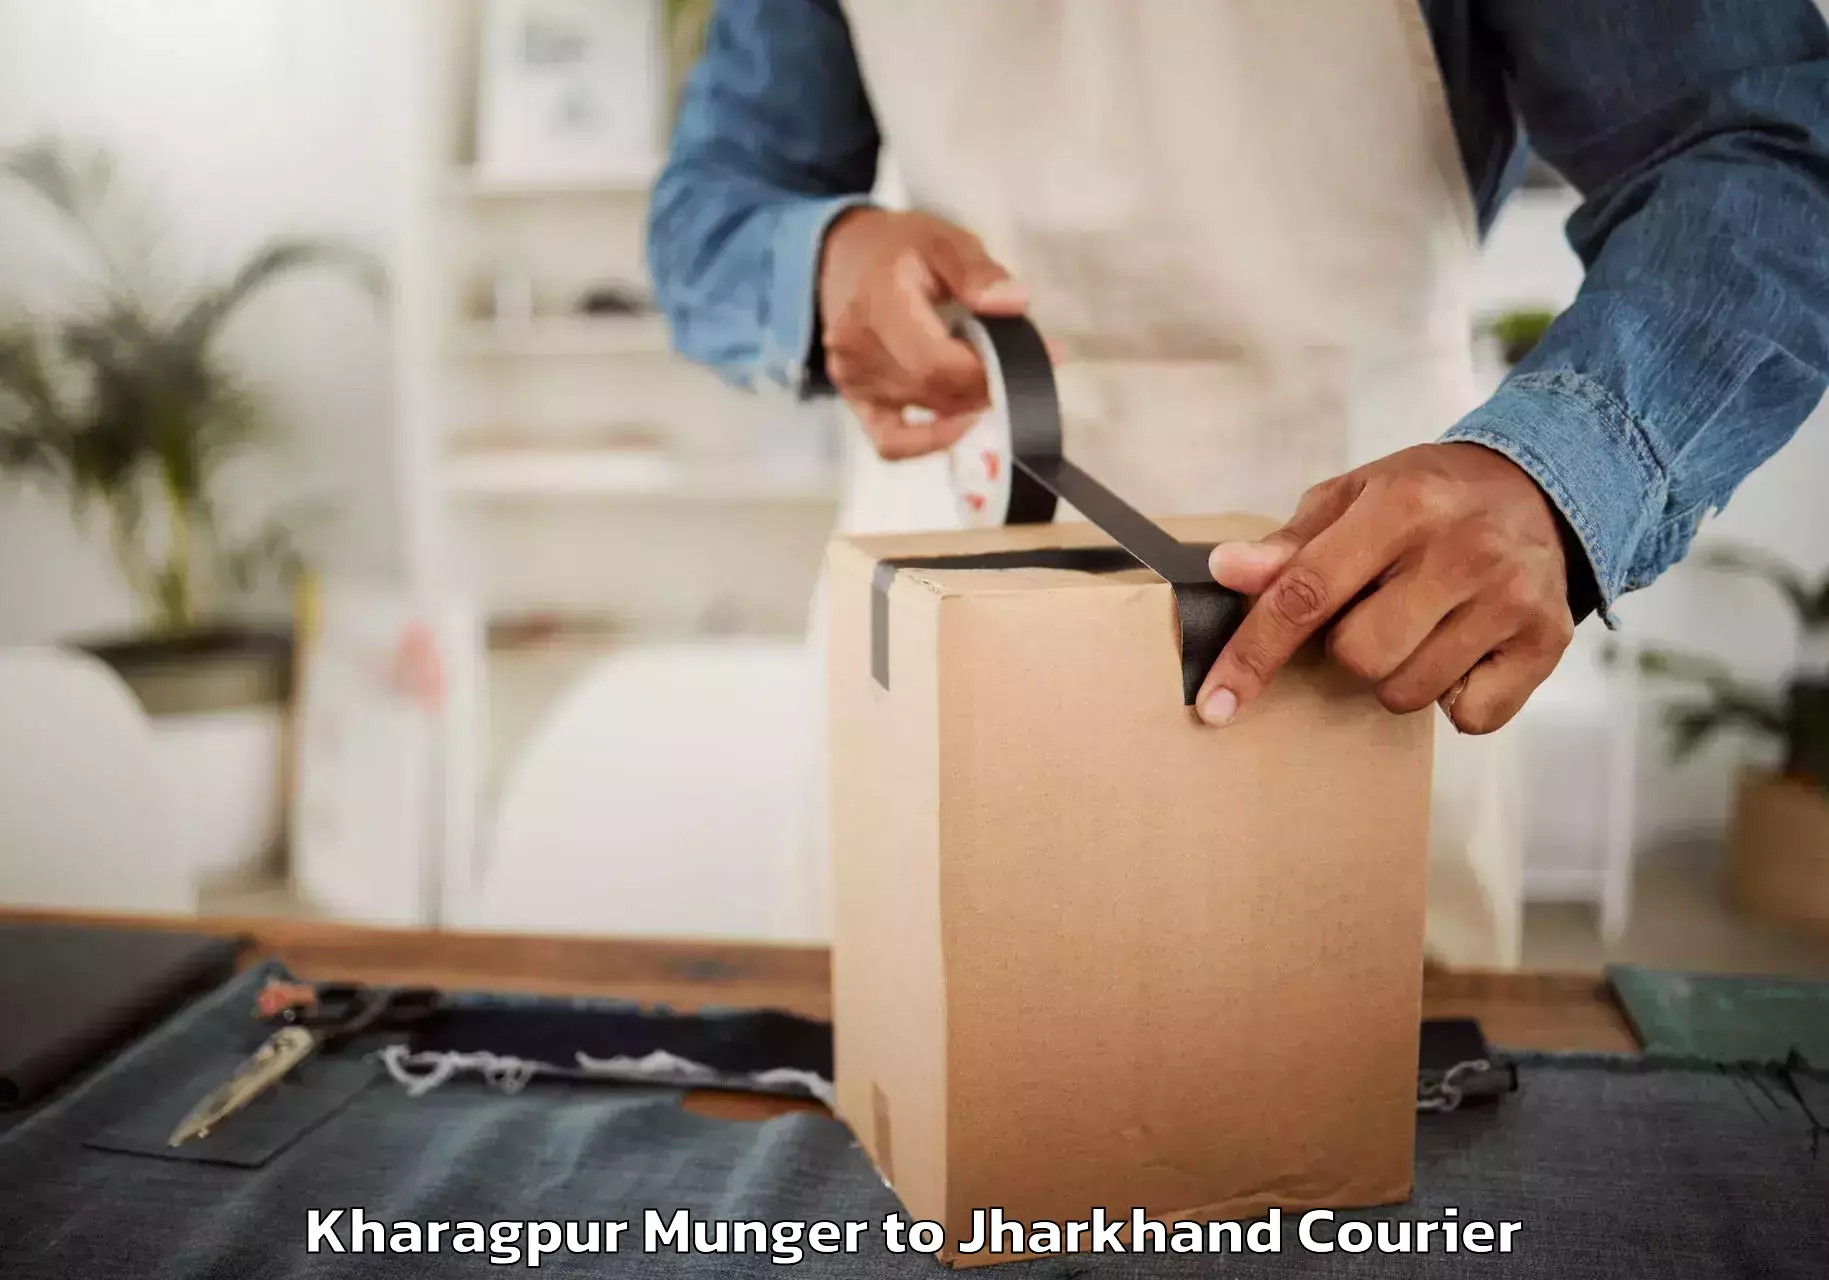 Quality relocation services Kharagpur Munger to Jharia